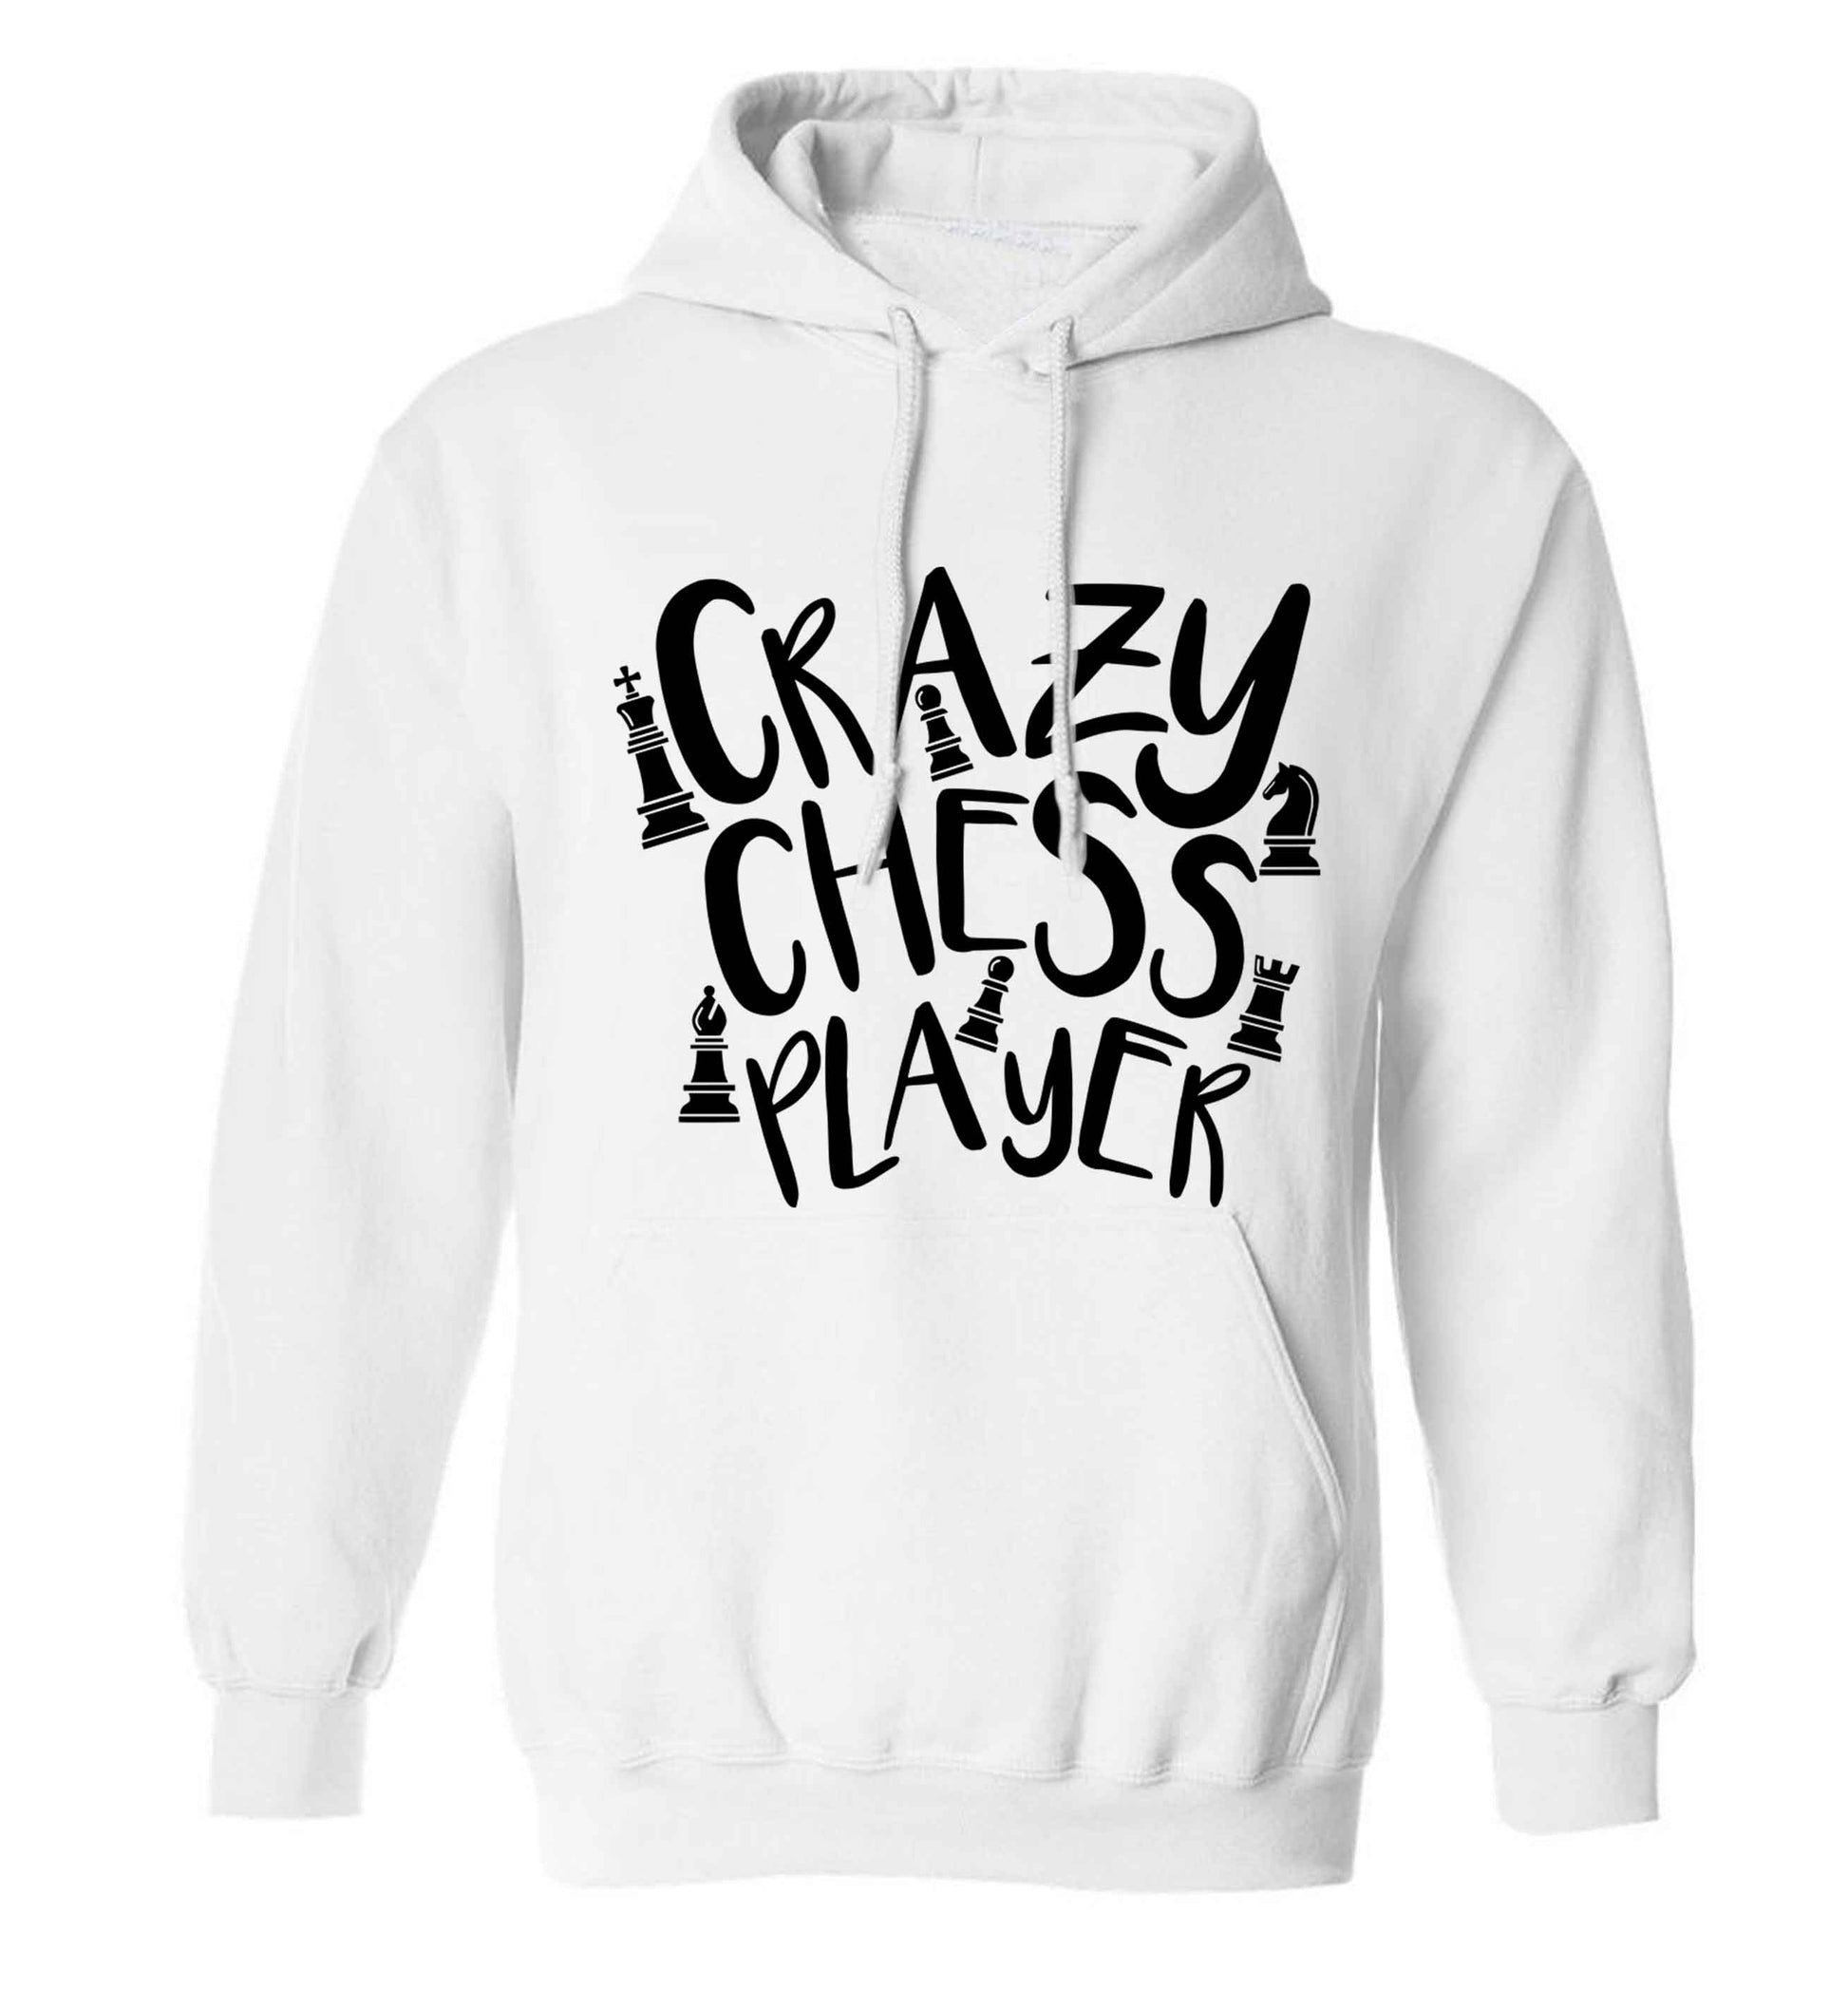 Crazy chess player adults unisex white hoodie 2XL